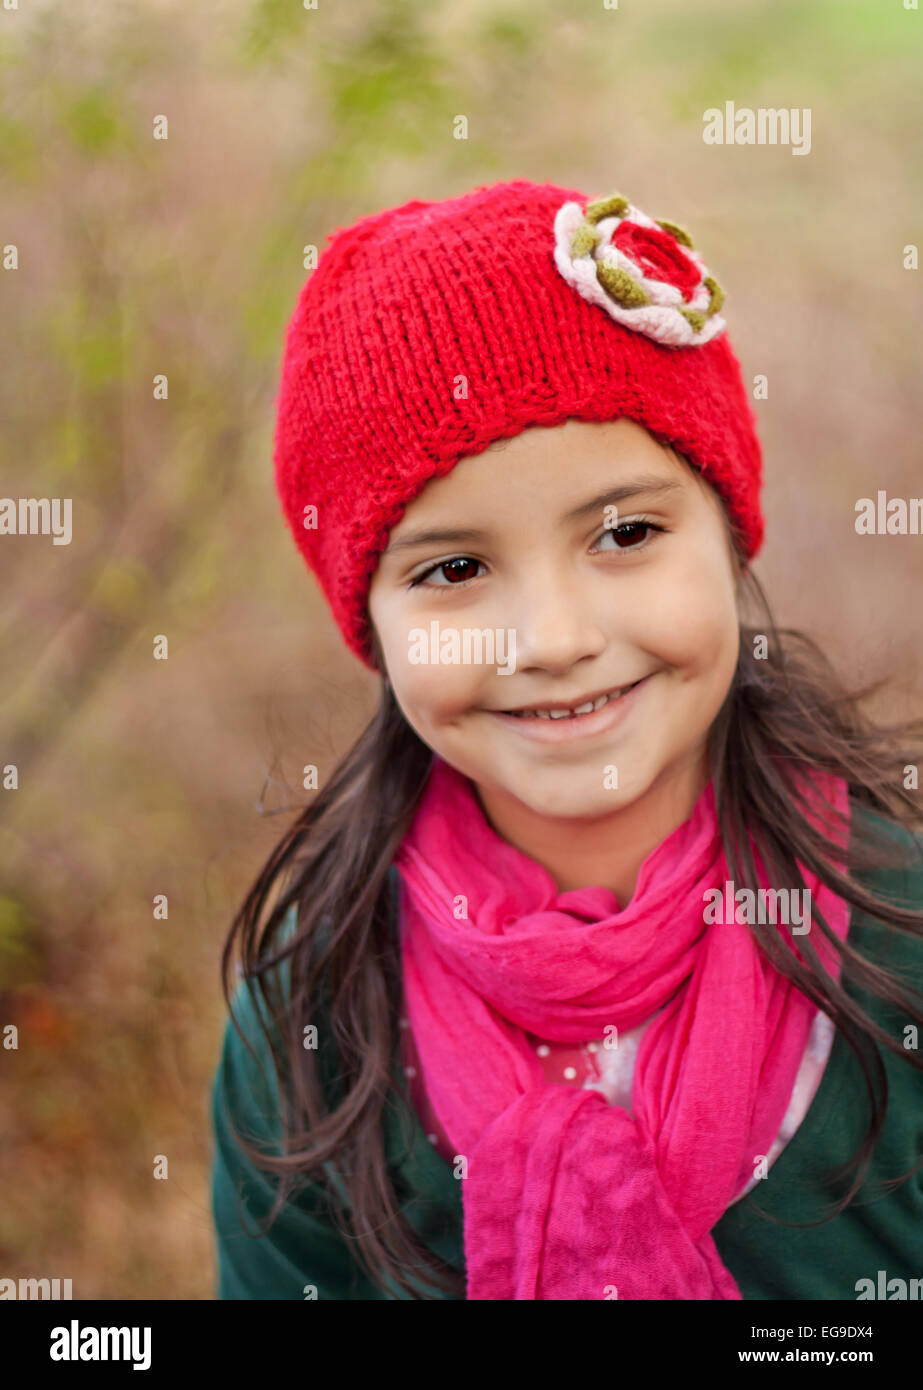 Girl (4-5) wearing a red knit hat smiling outdoors Stock Photo